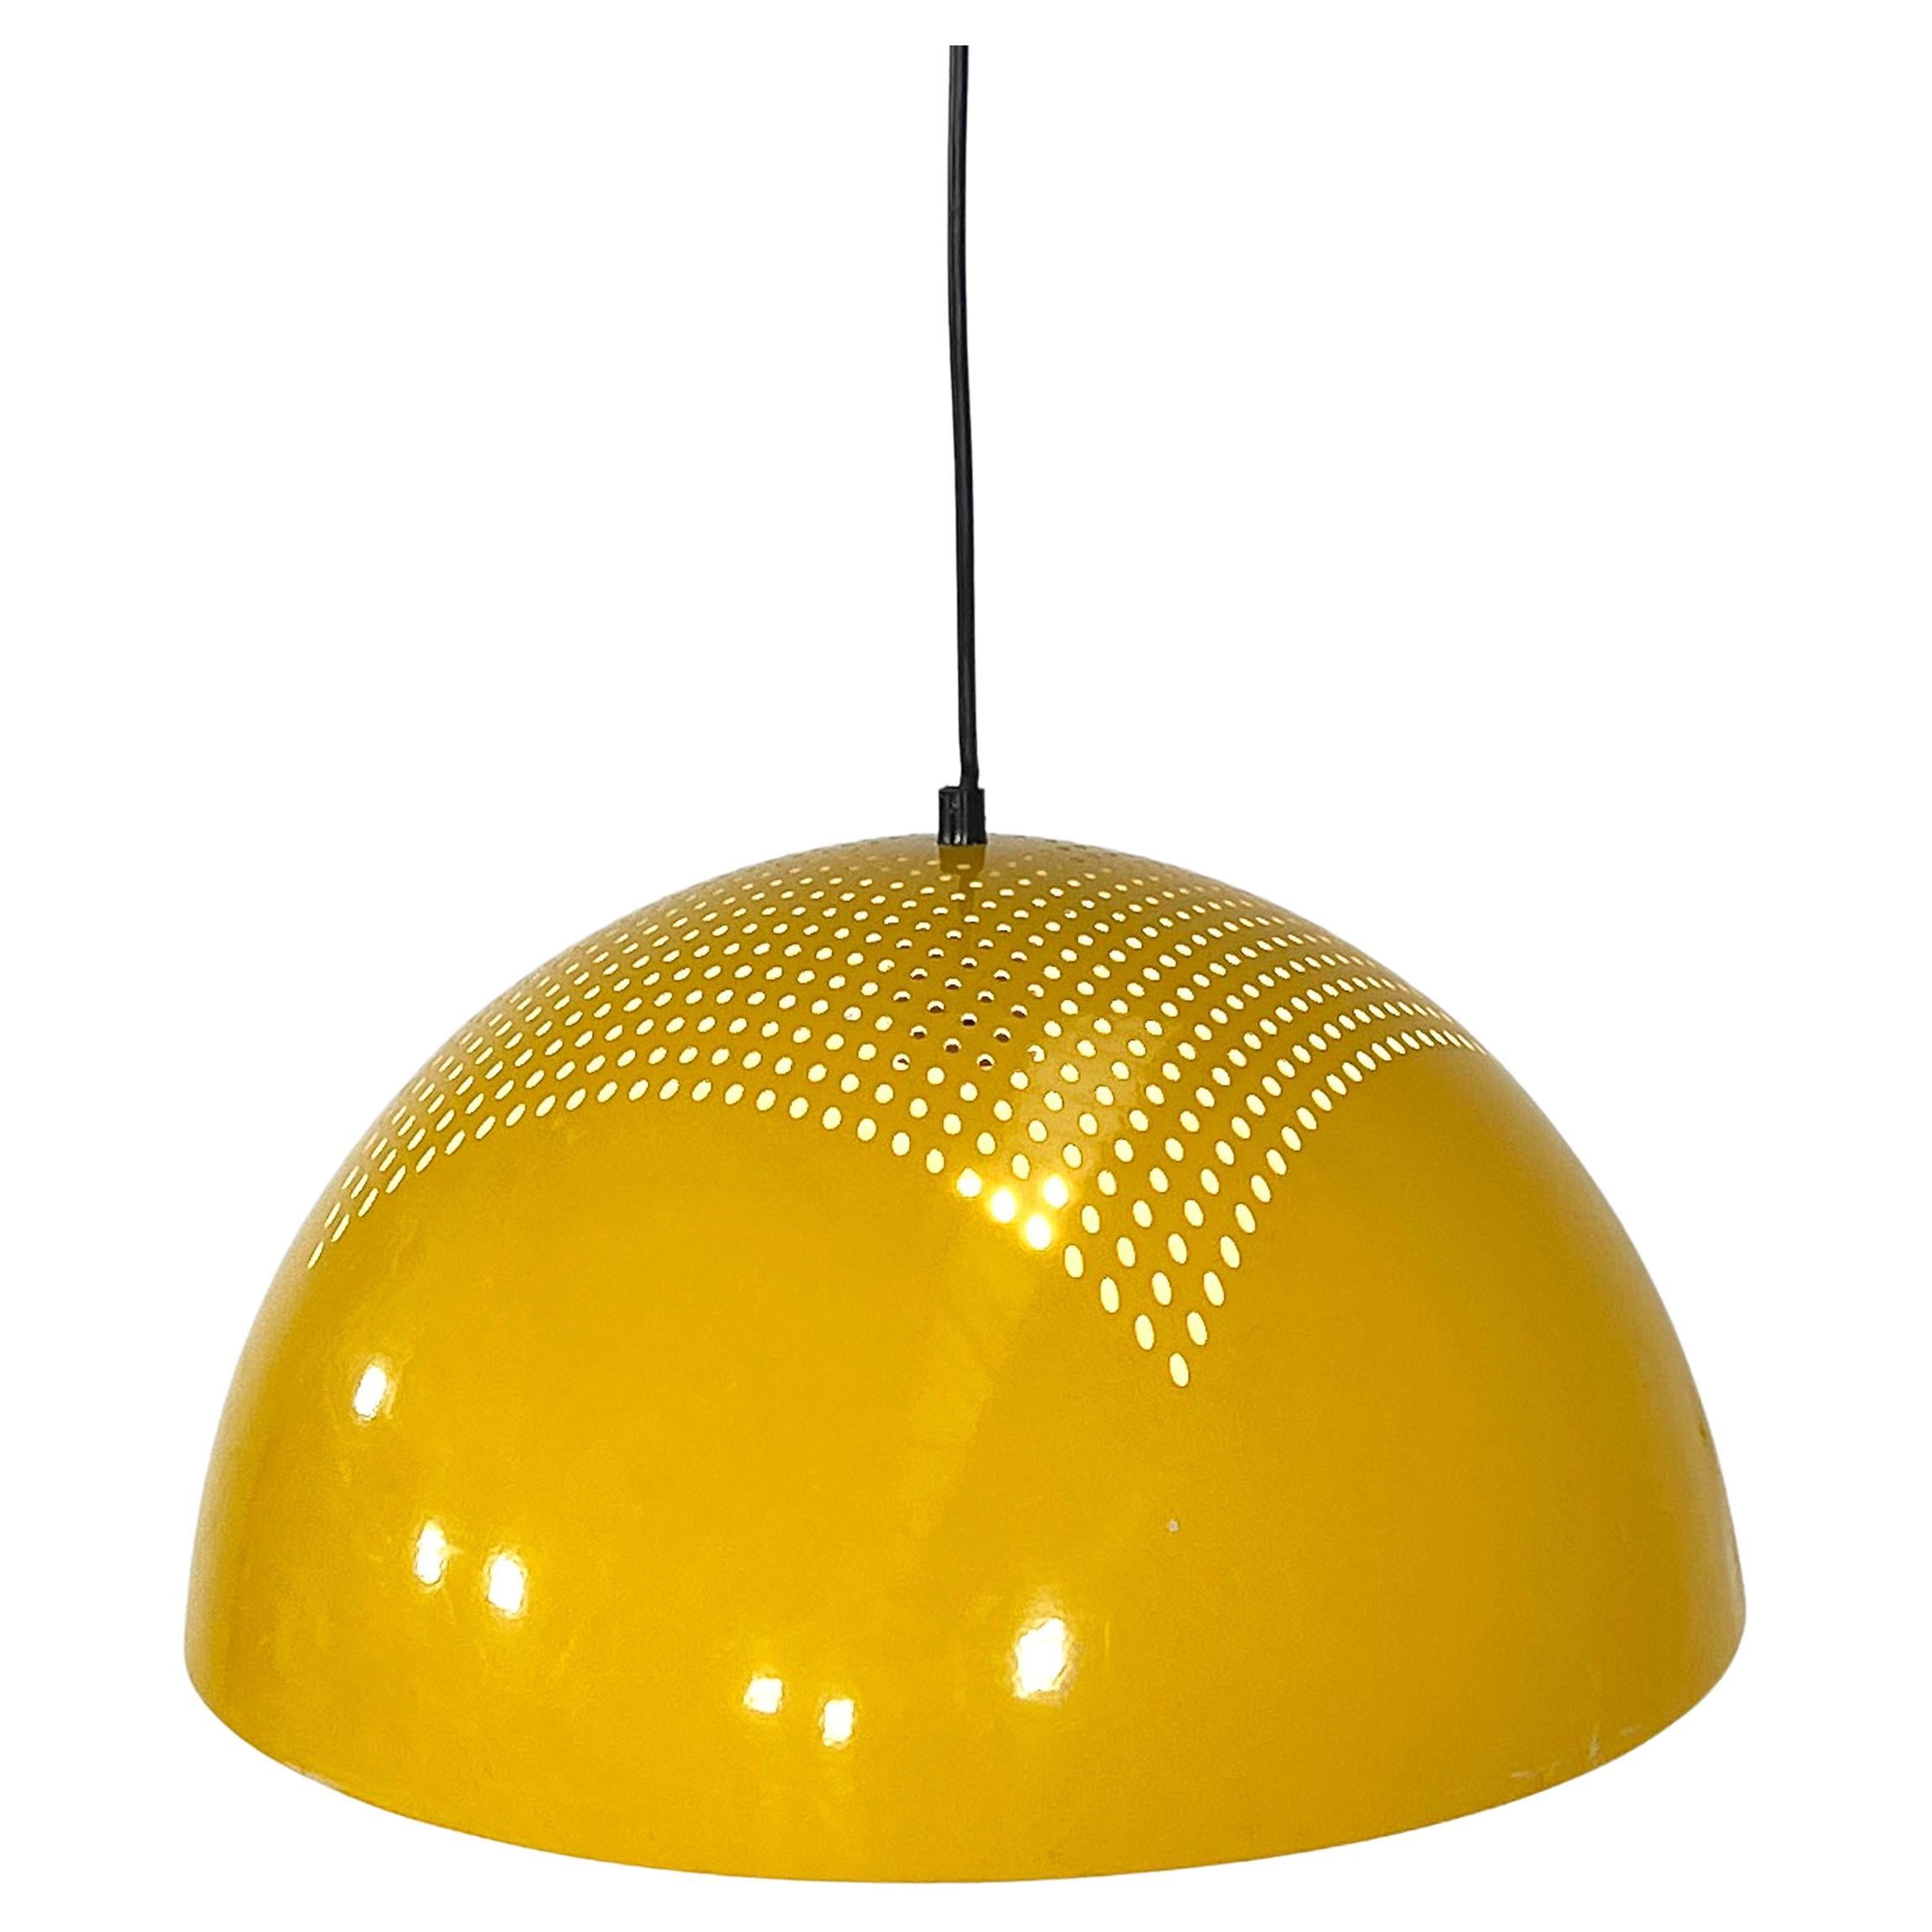 Yellow Ceiling Light in Perforated Metal, 1970s